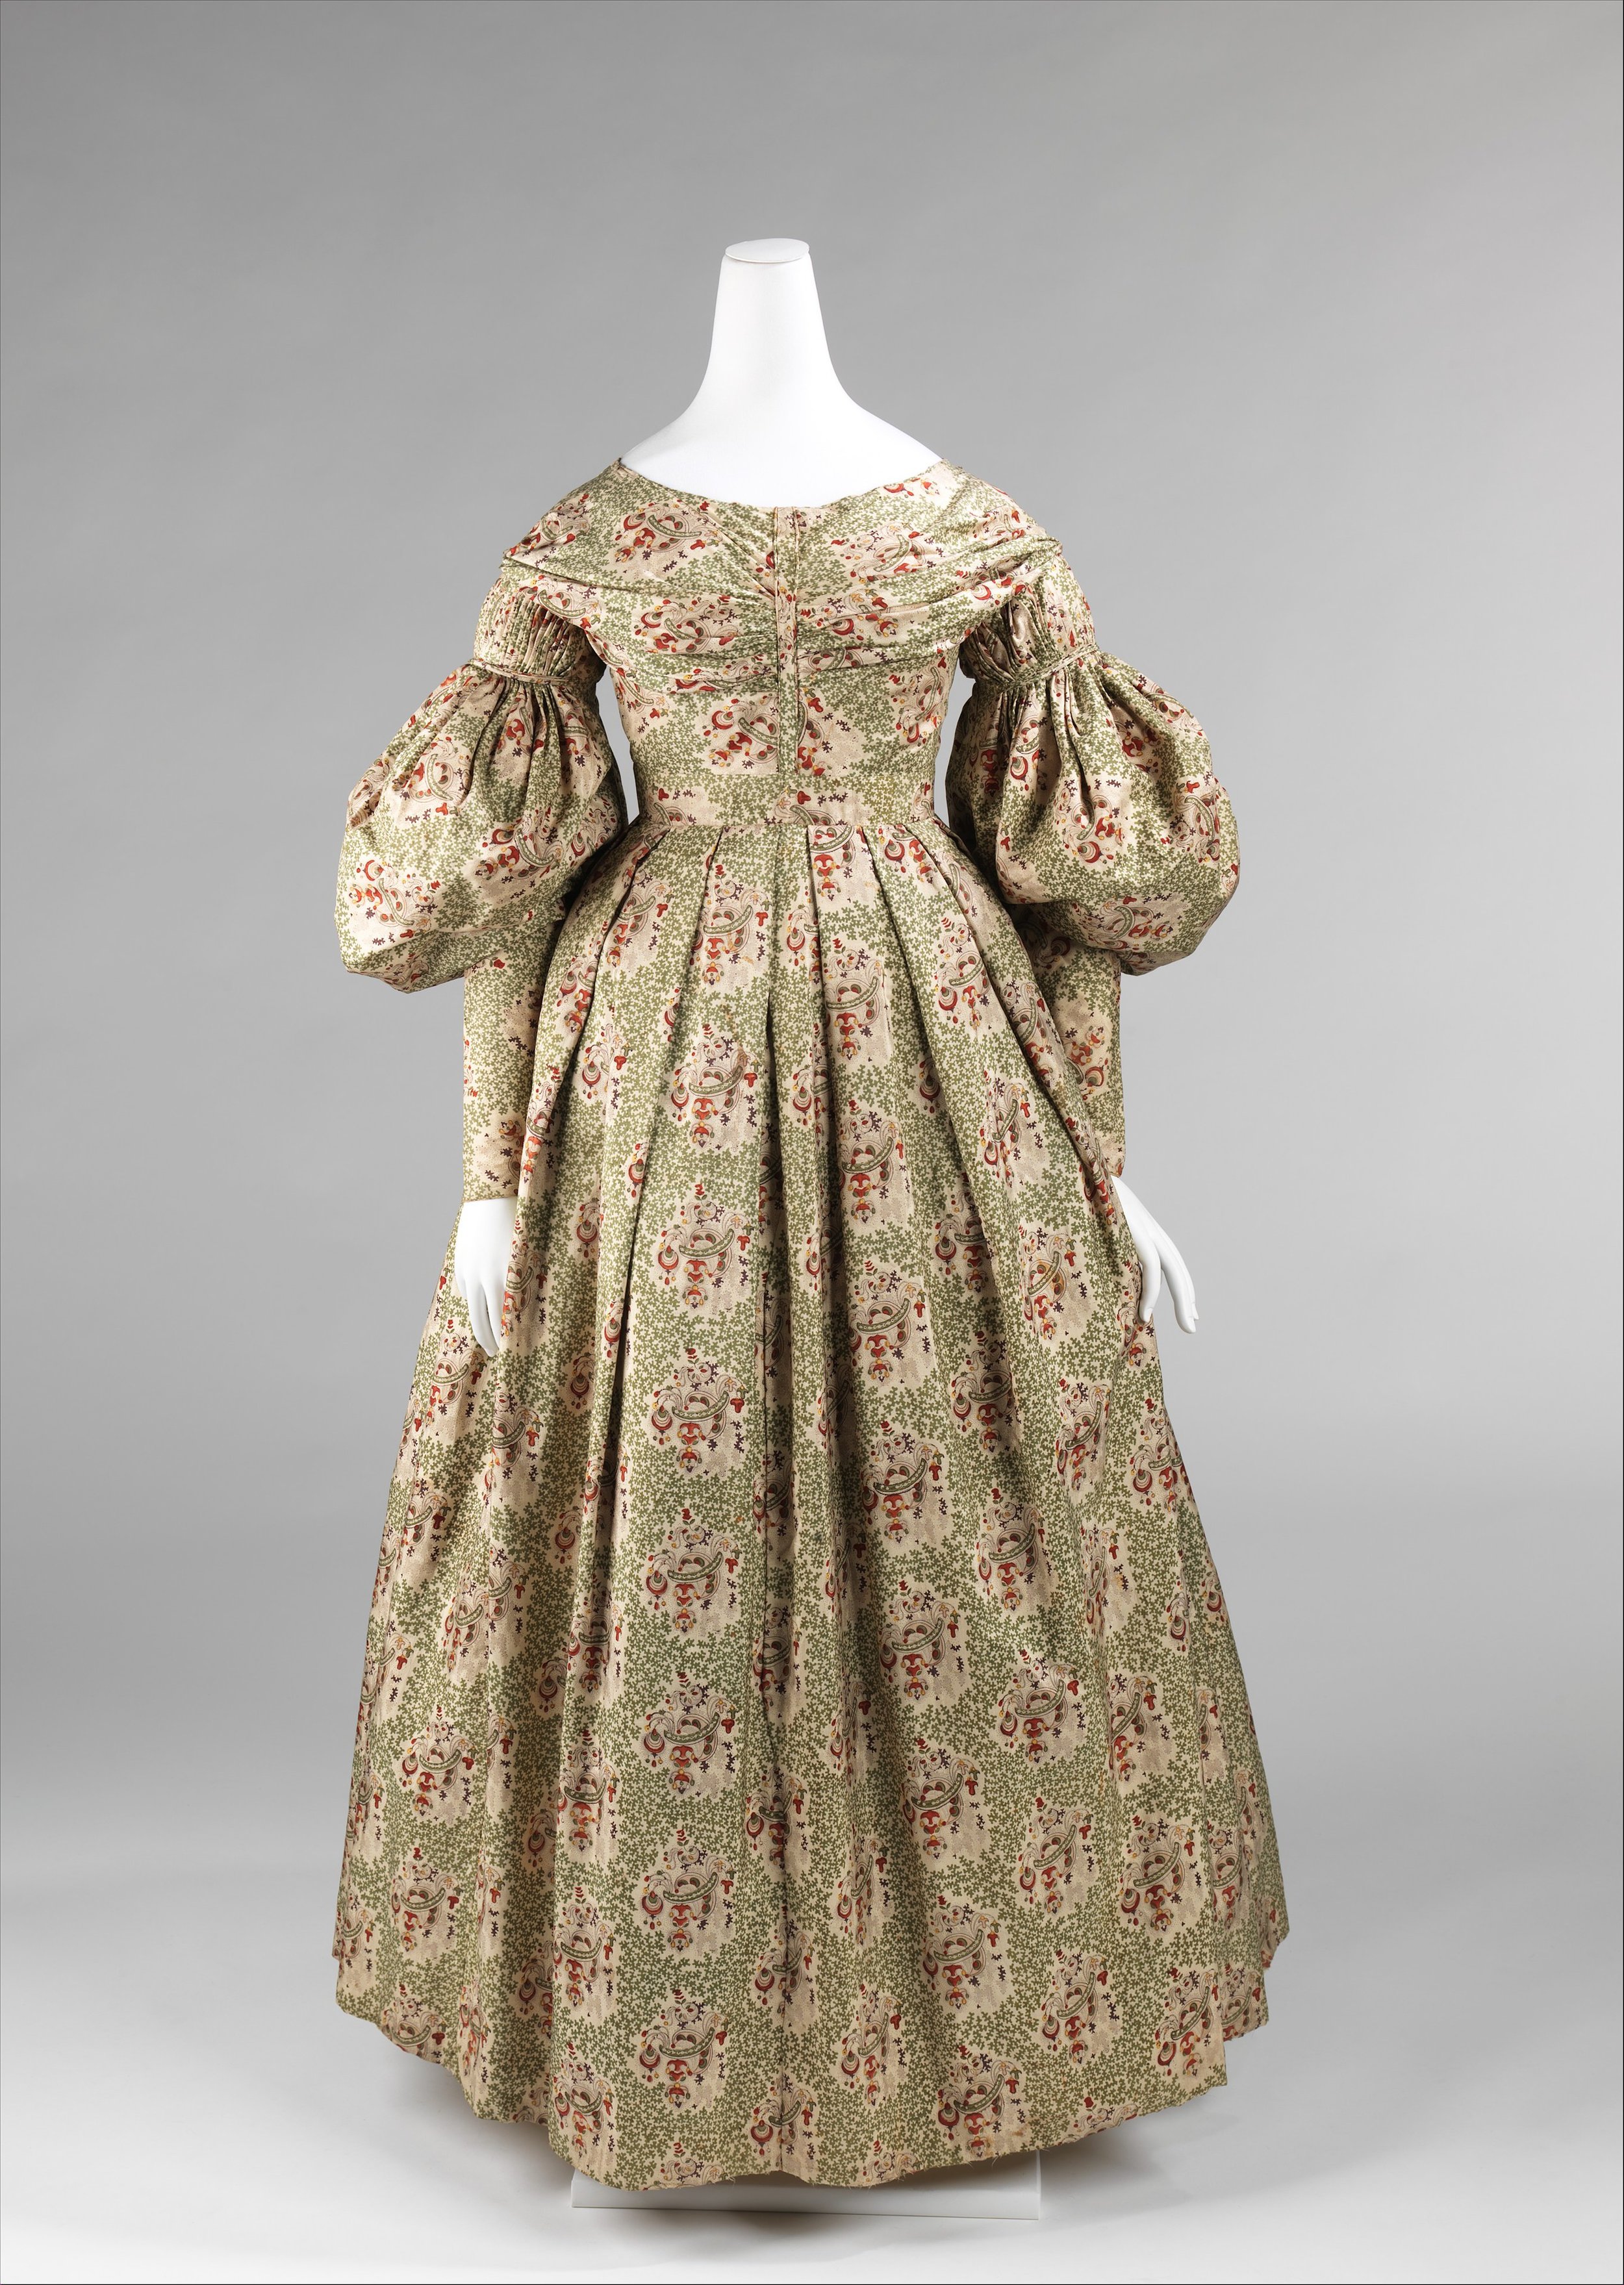 1830s Afternoon Dress | The Met Museum